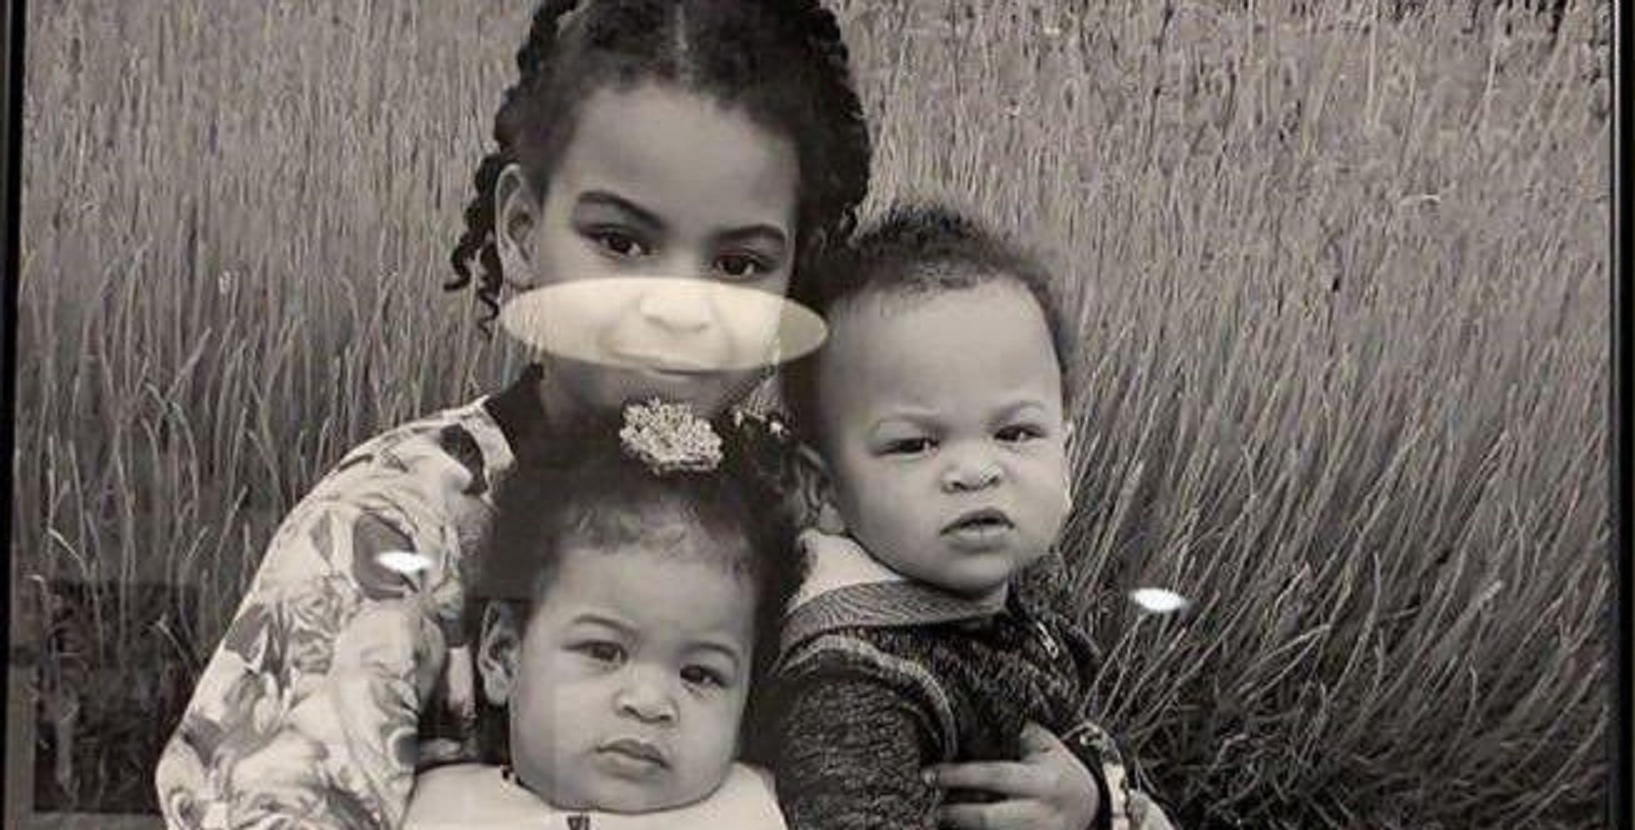 Someone Just Leaked Beyonce’s Kids’ Picture Online – Blue Ivy, Rumi and Sir Break the Internet!